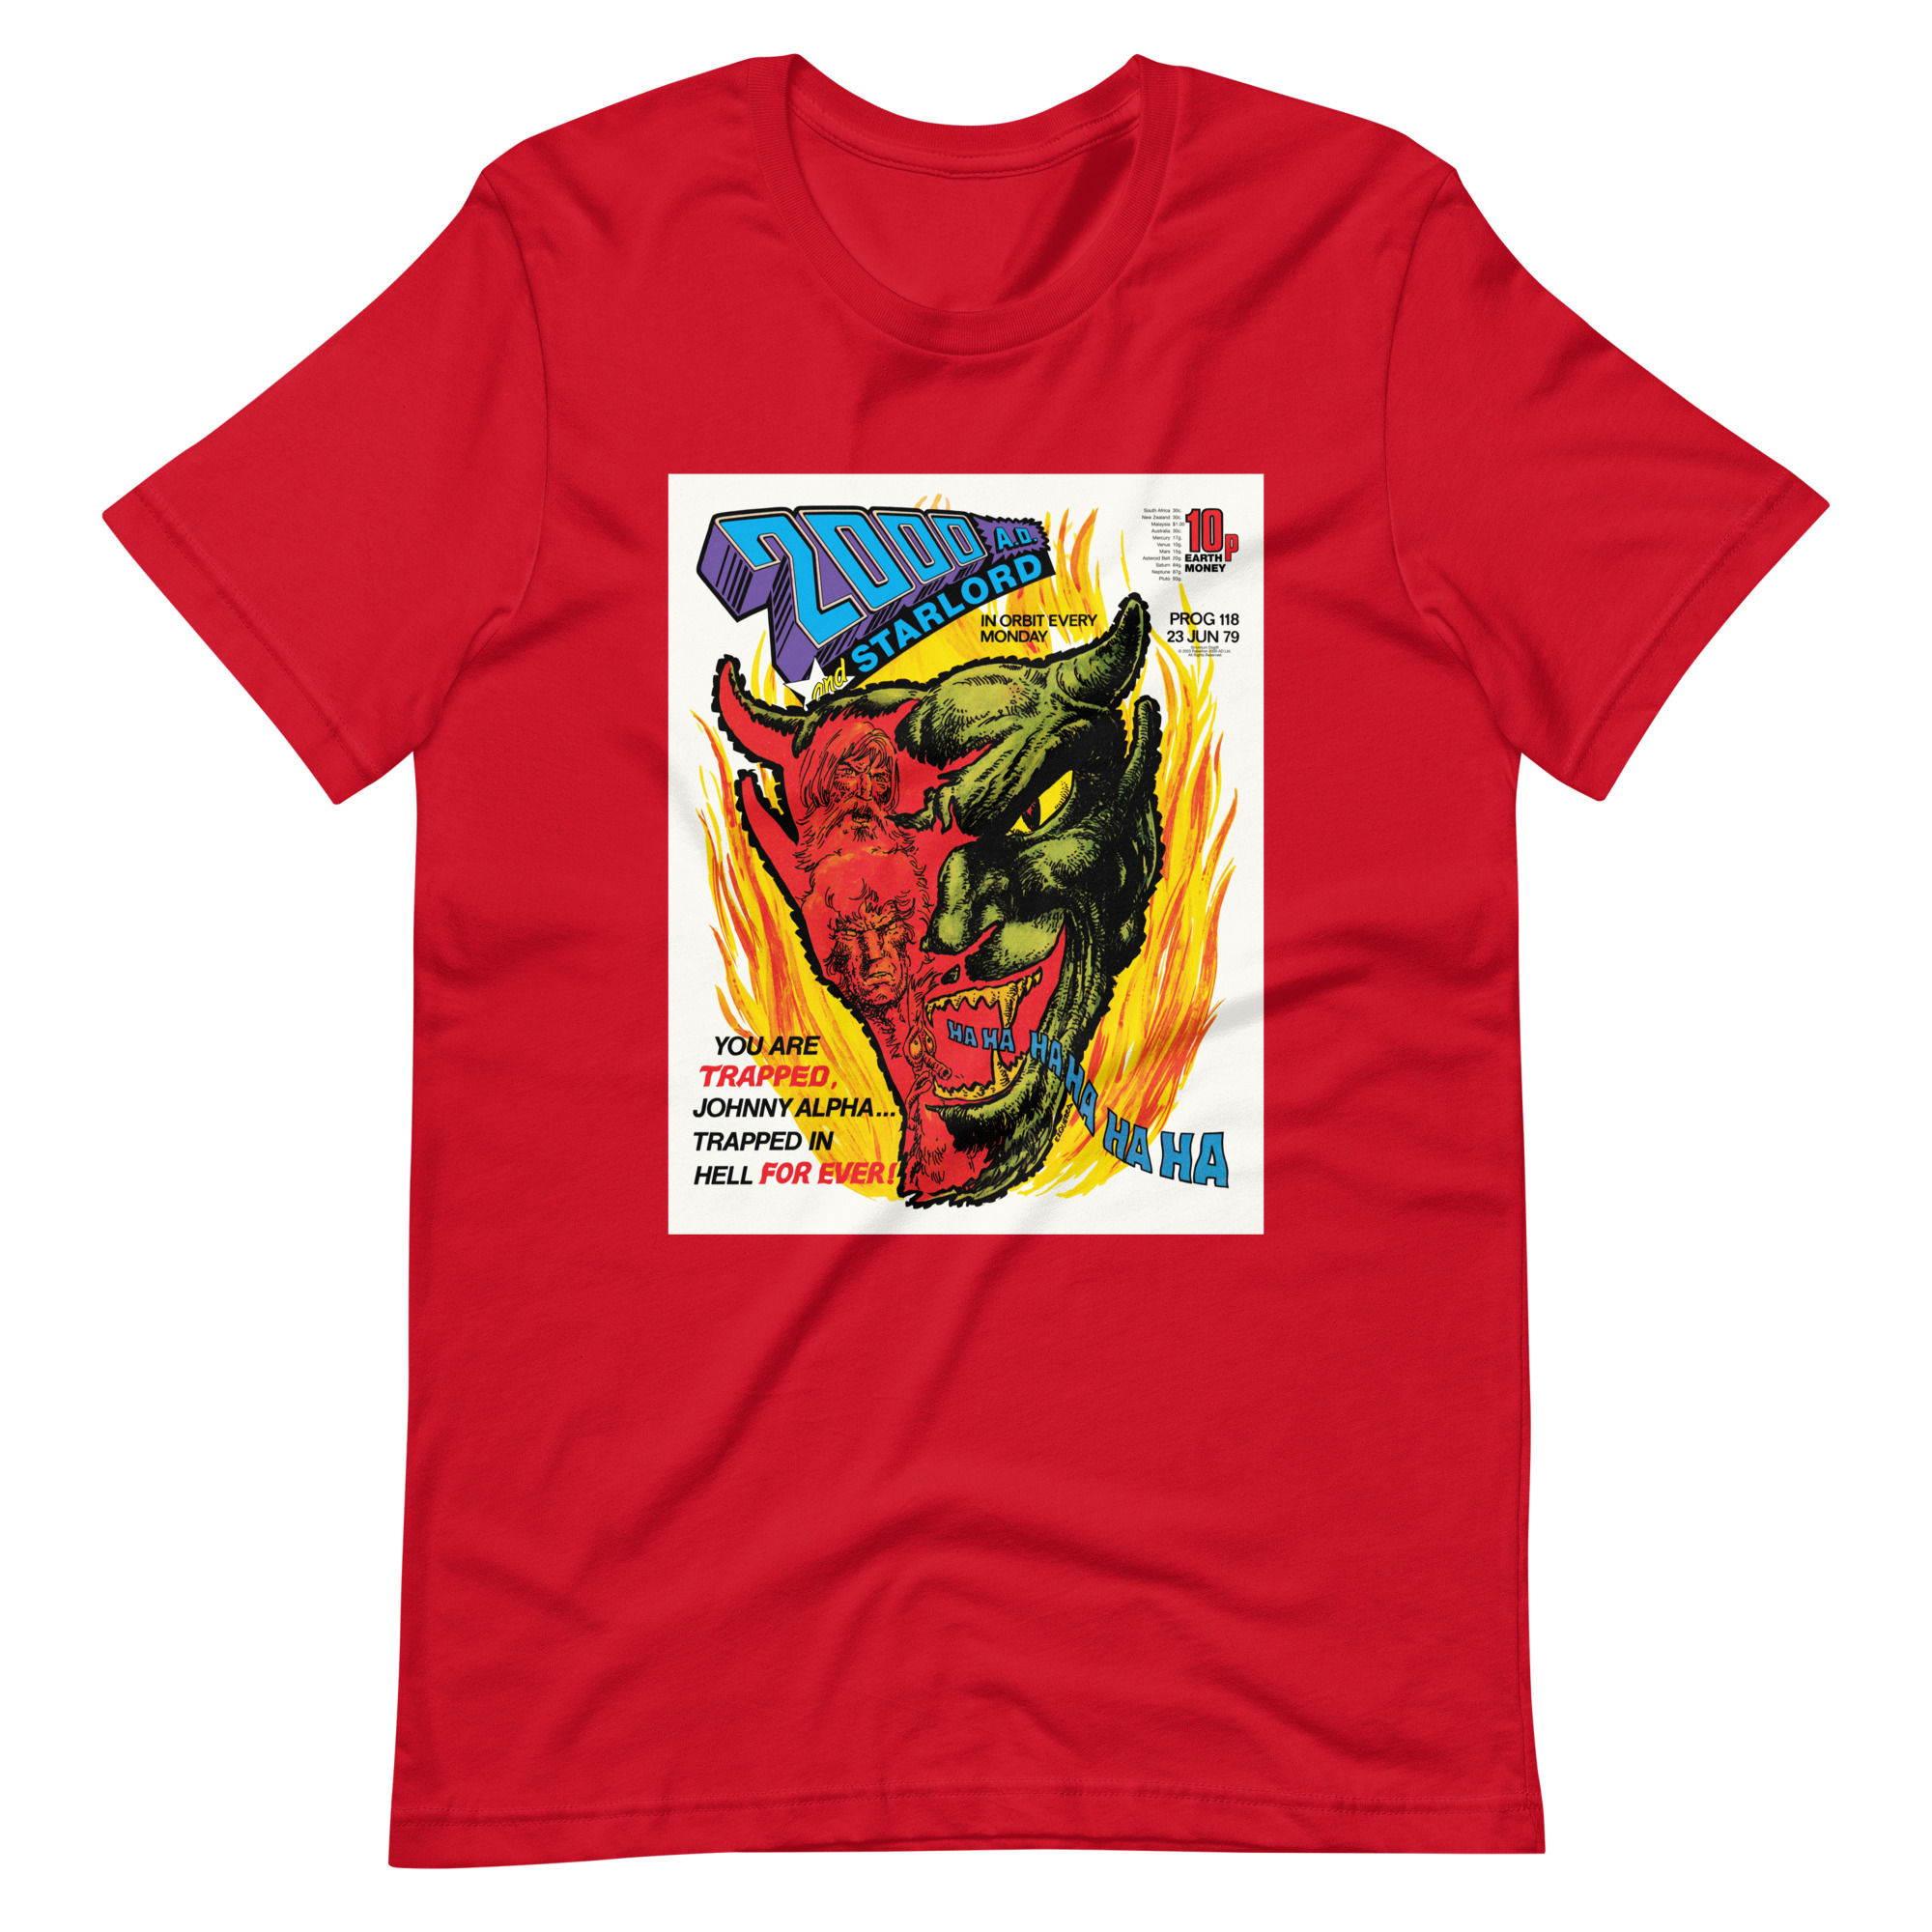 Red Tshirt with an image on the chest. Image is cover of 2000 AD prog 118 and depicts a laughing Devil face in flames